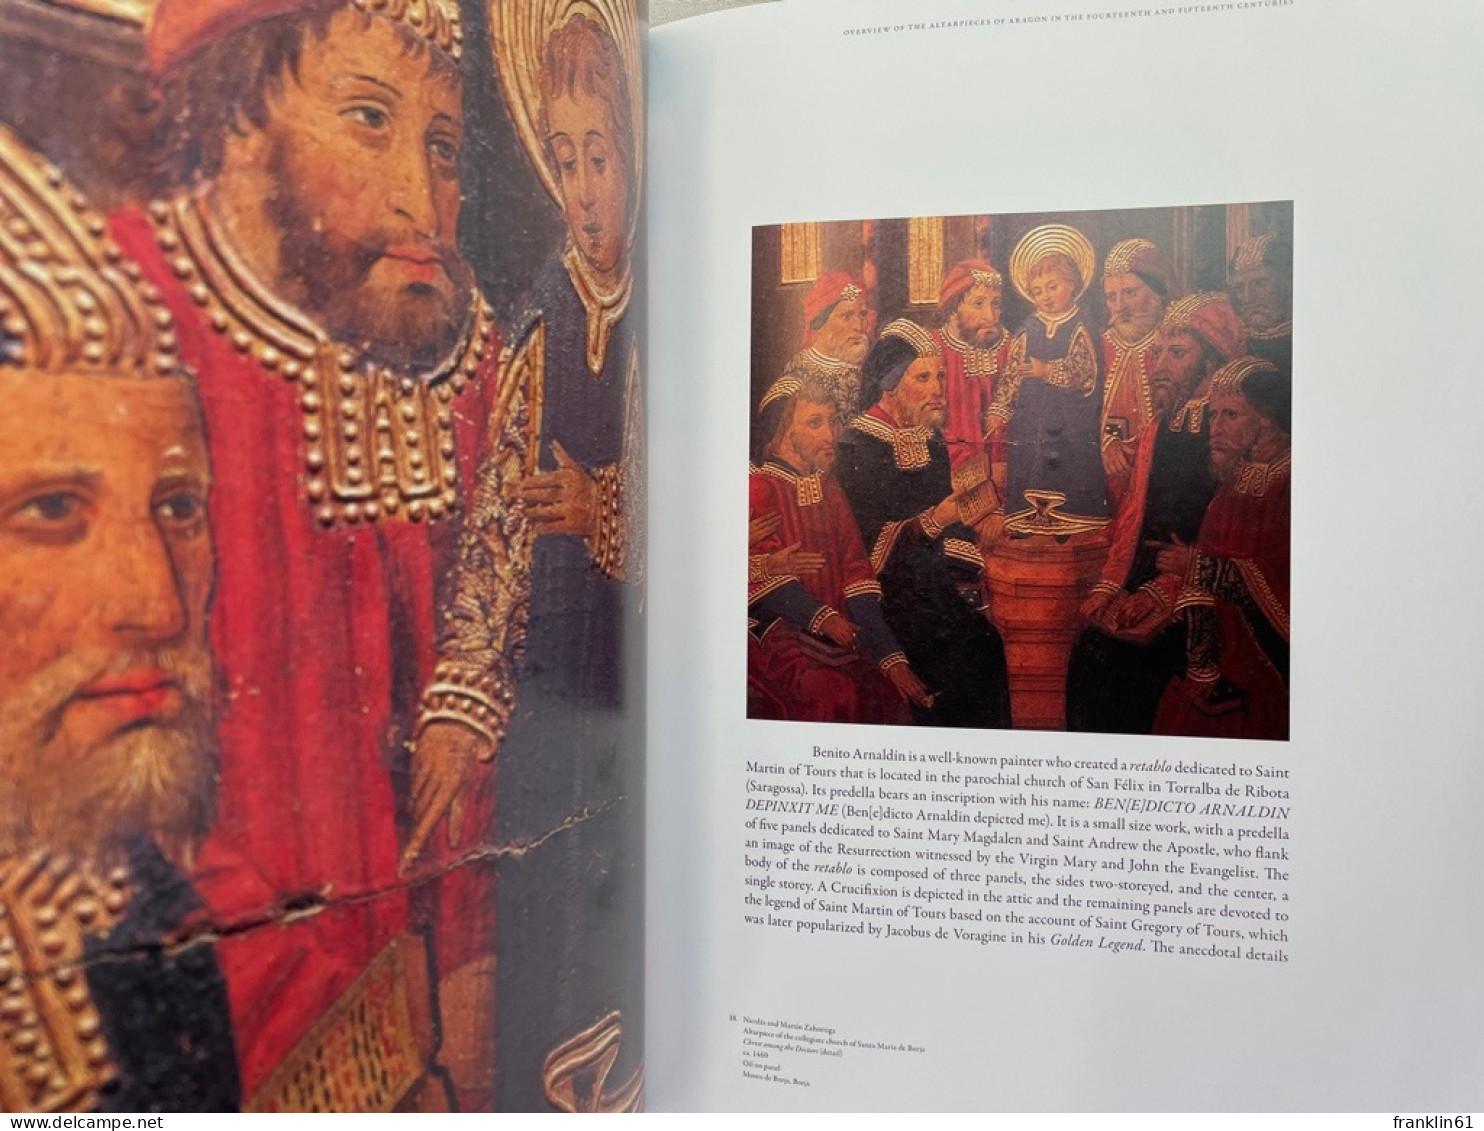 Uneasy Communion: Jews, Christians and the Altarpieces of Medieval Spain.